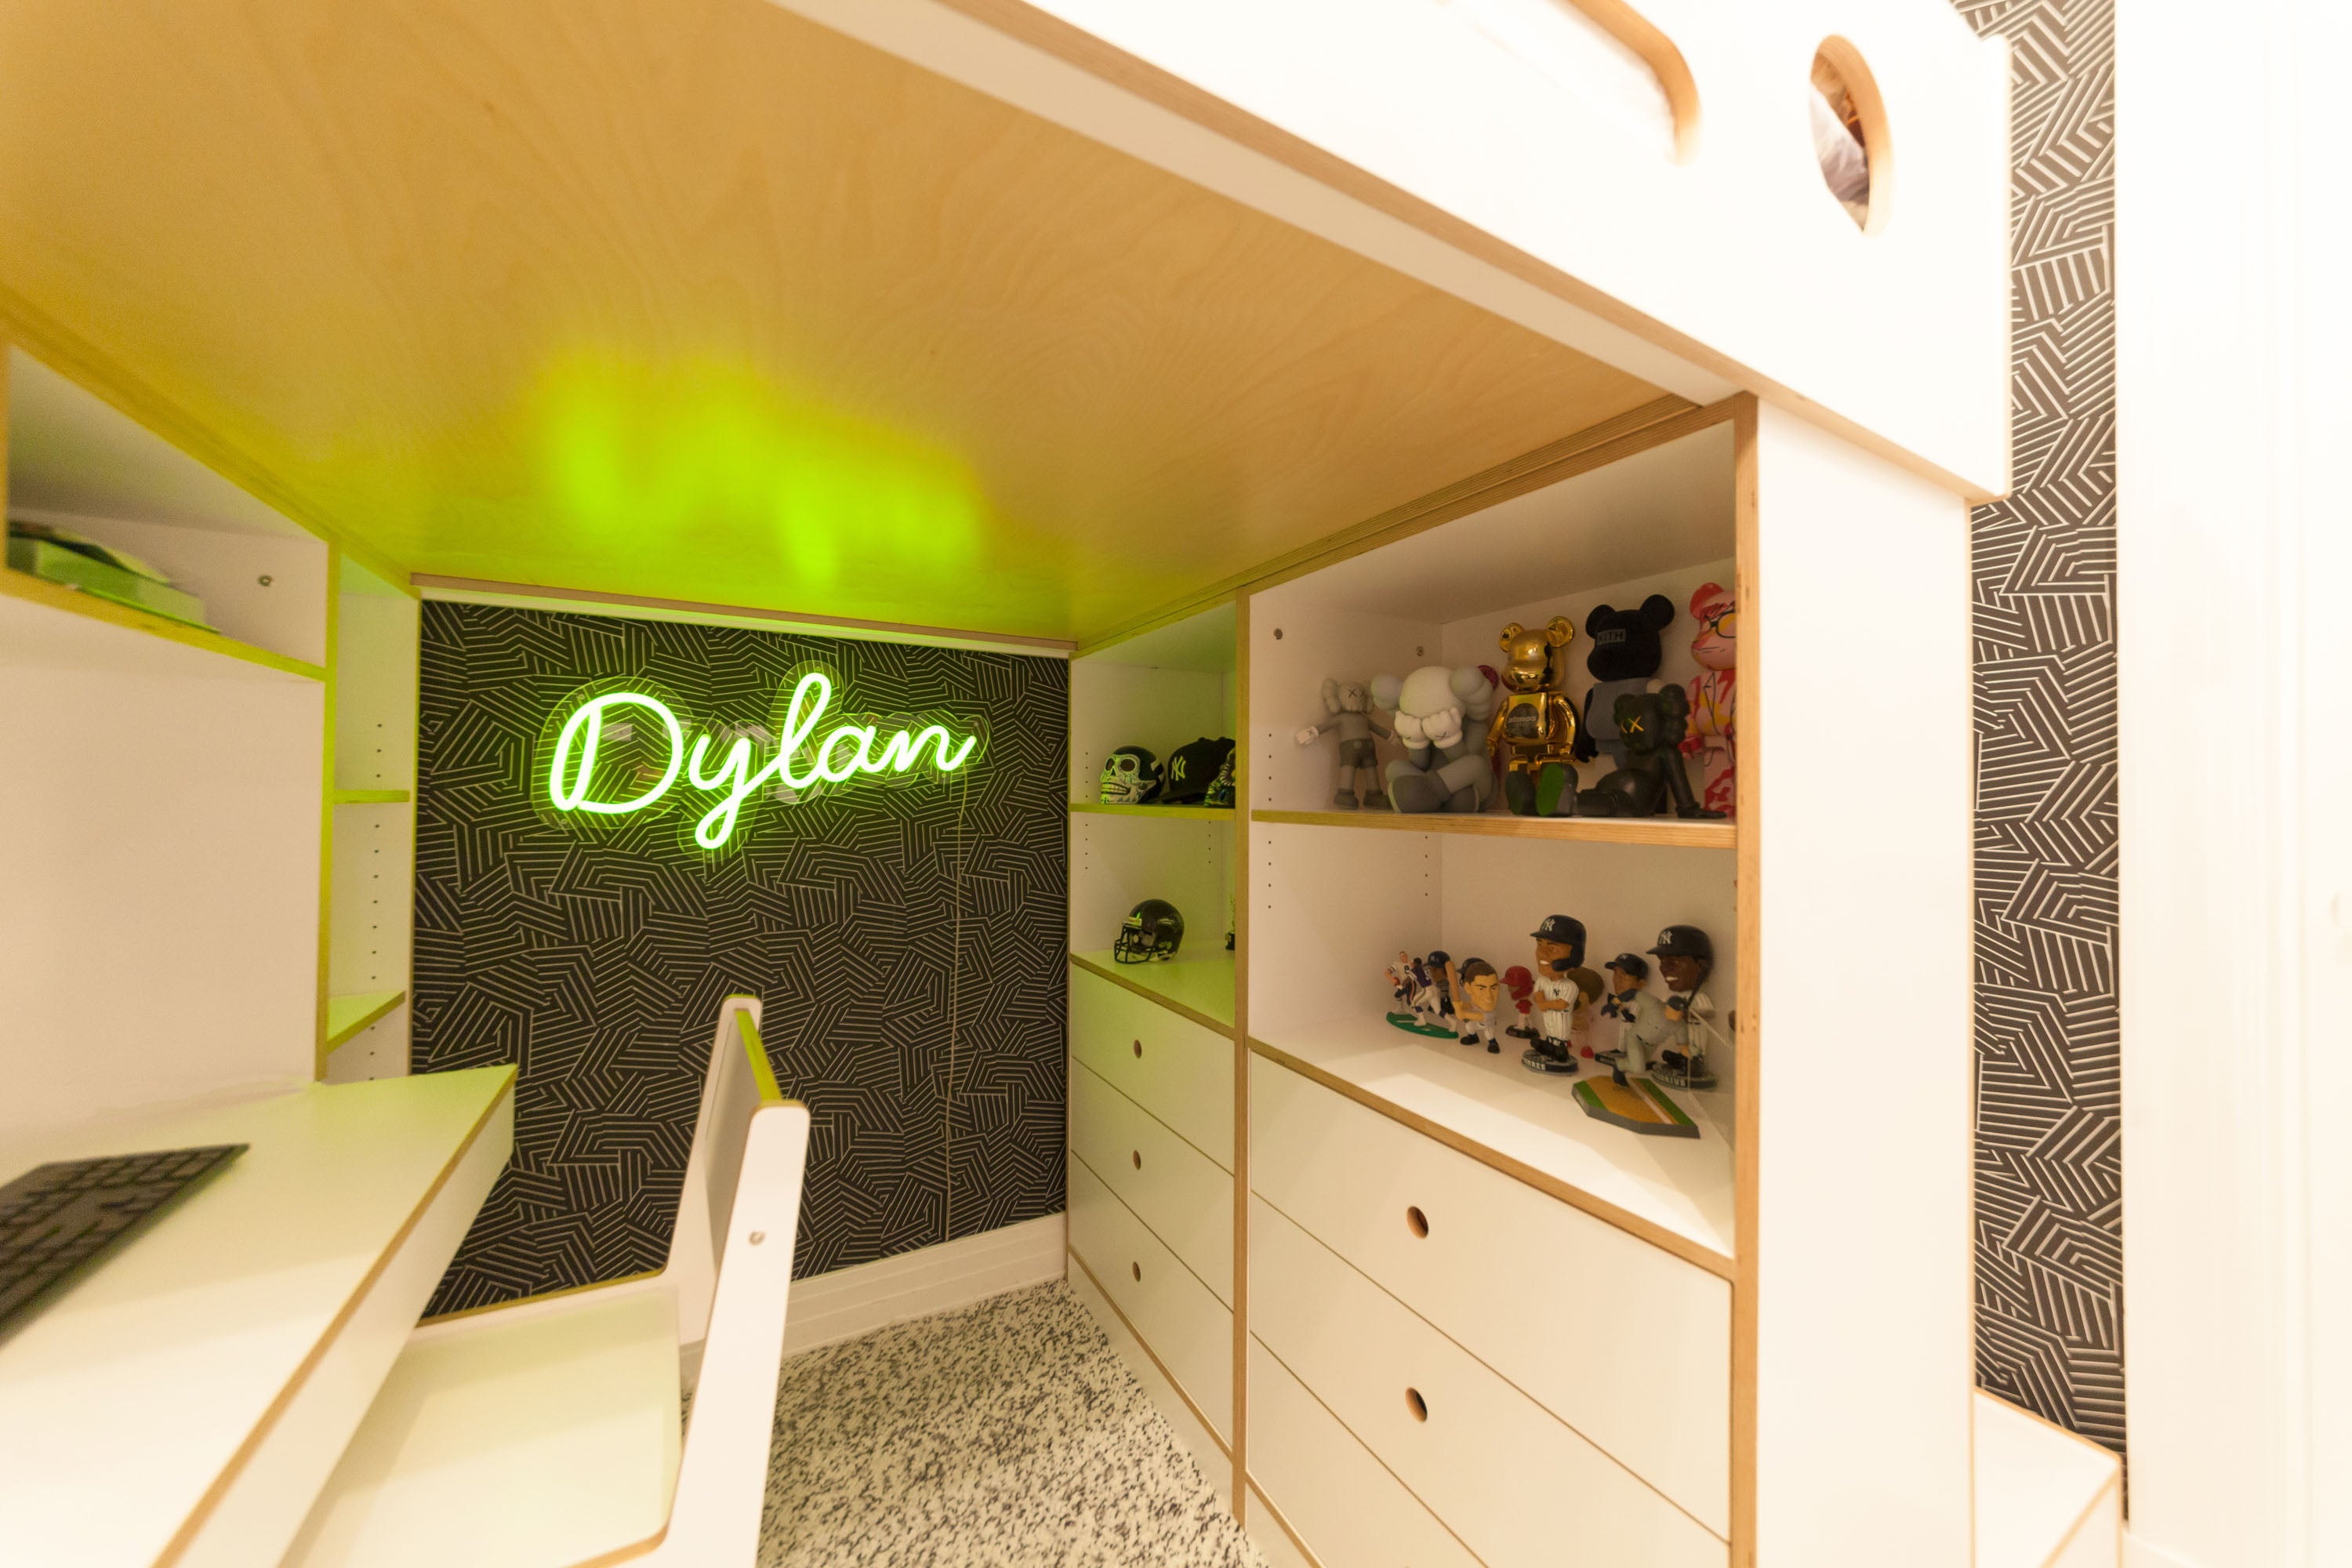 Neon ‘Dylan’ sign, cozy room, shelves, collectibles, desk.